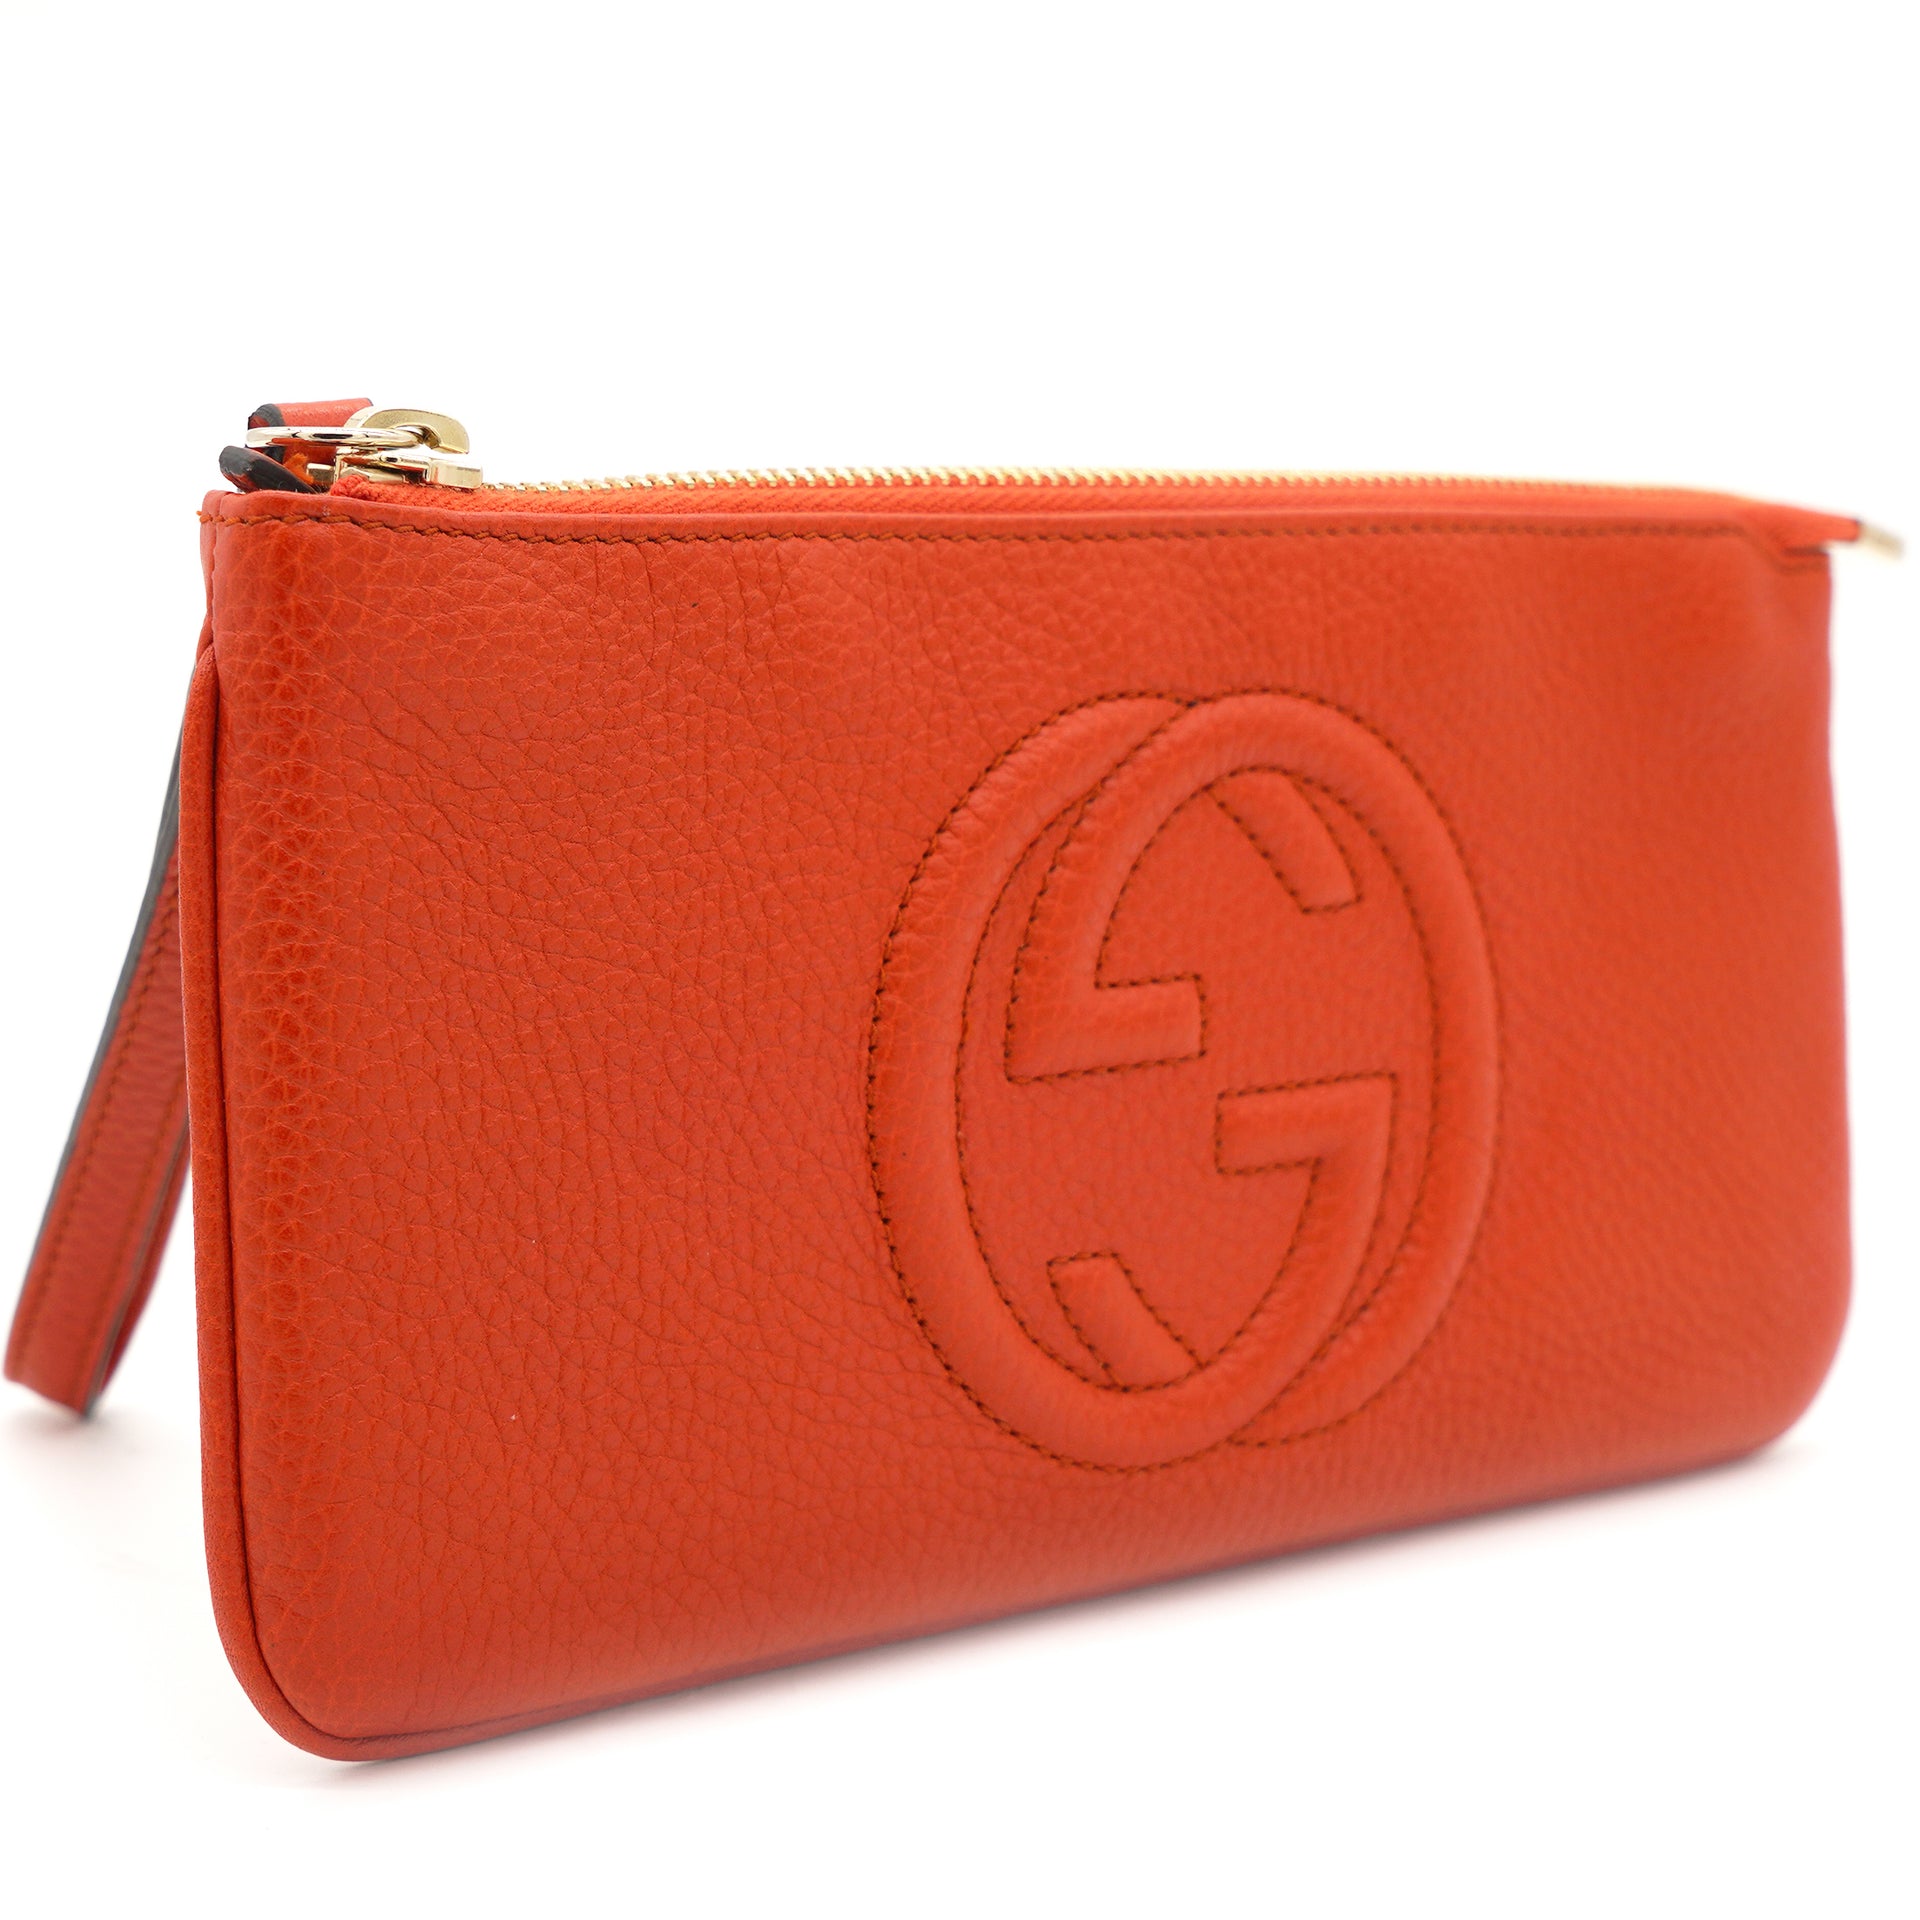 Gucci Ophidia gg Key Pouch in Natural | Lyst